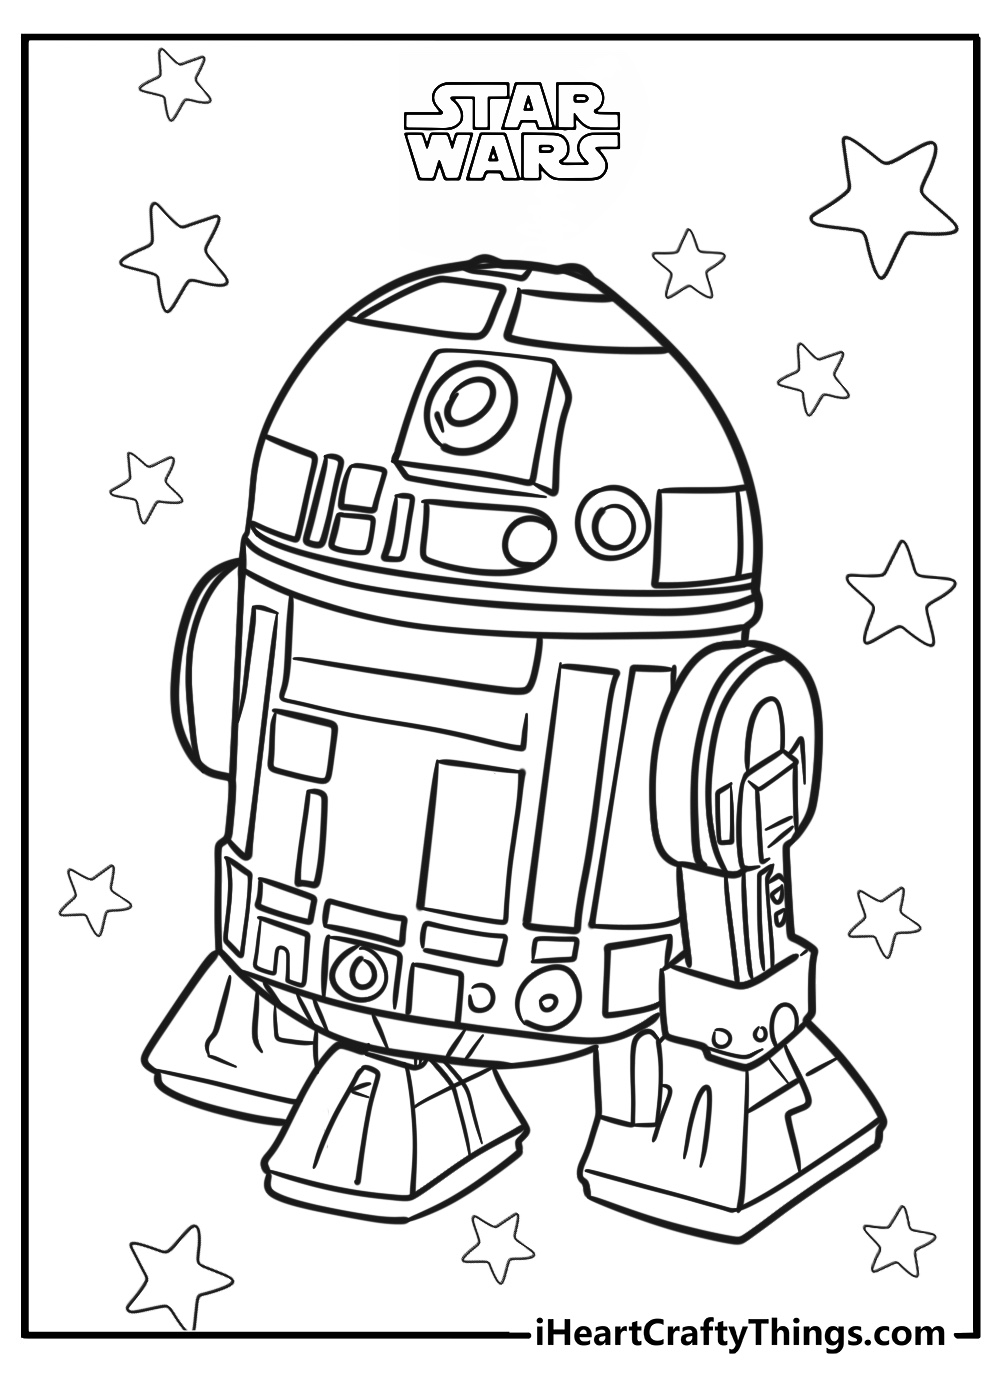 R2 D2 coloring page for kids